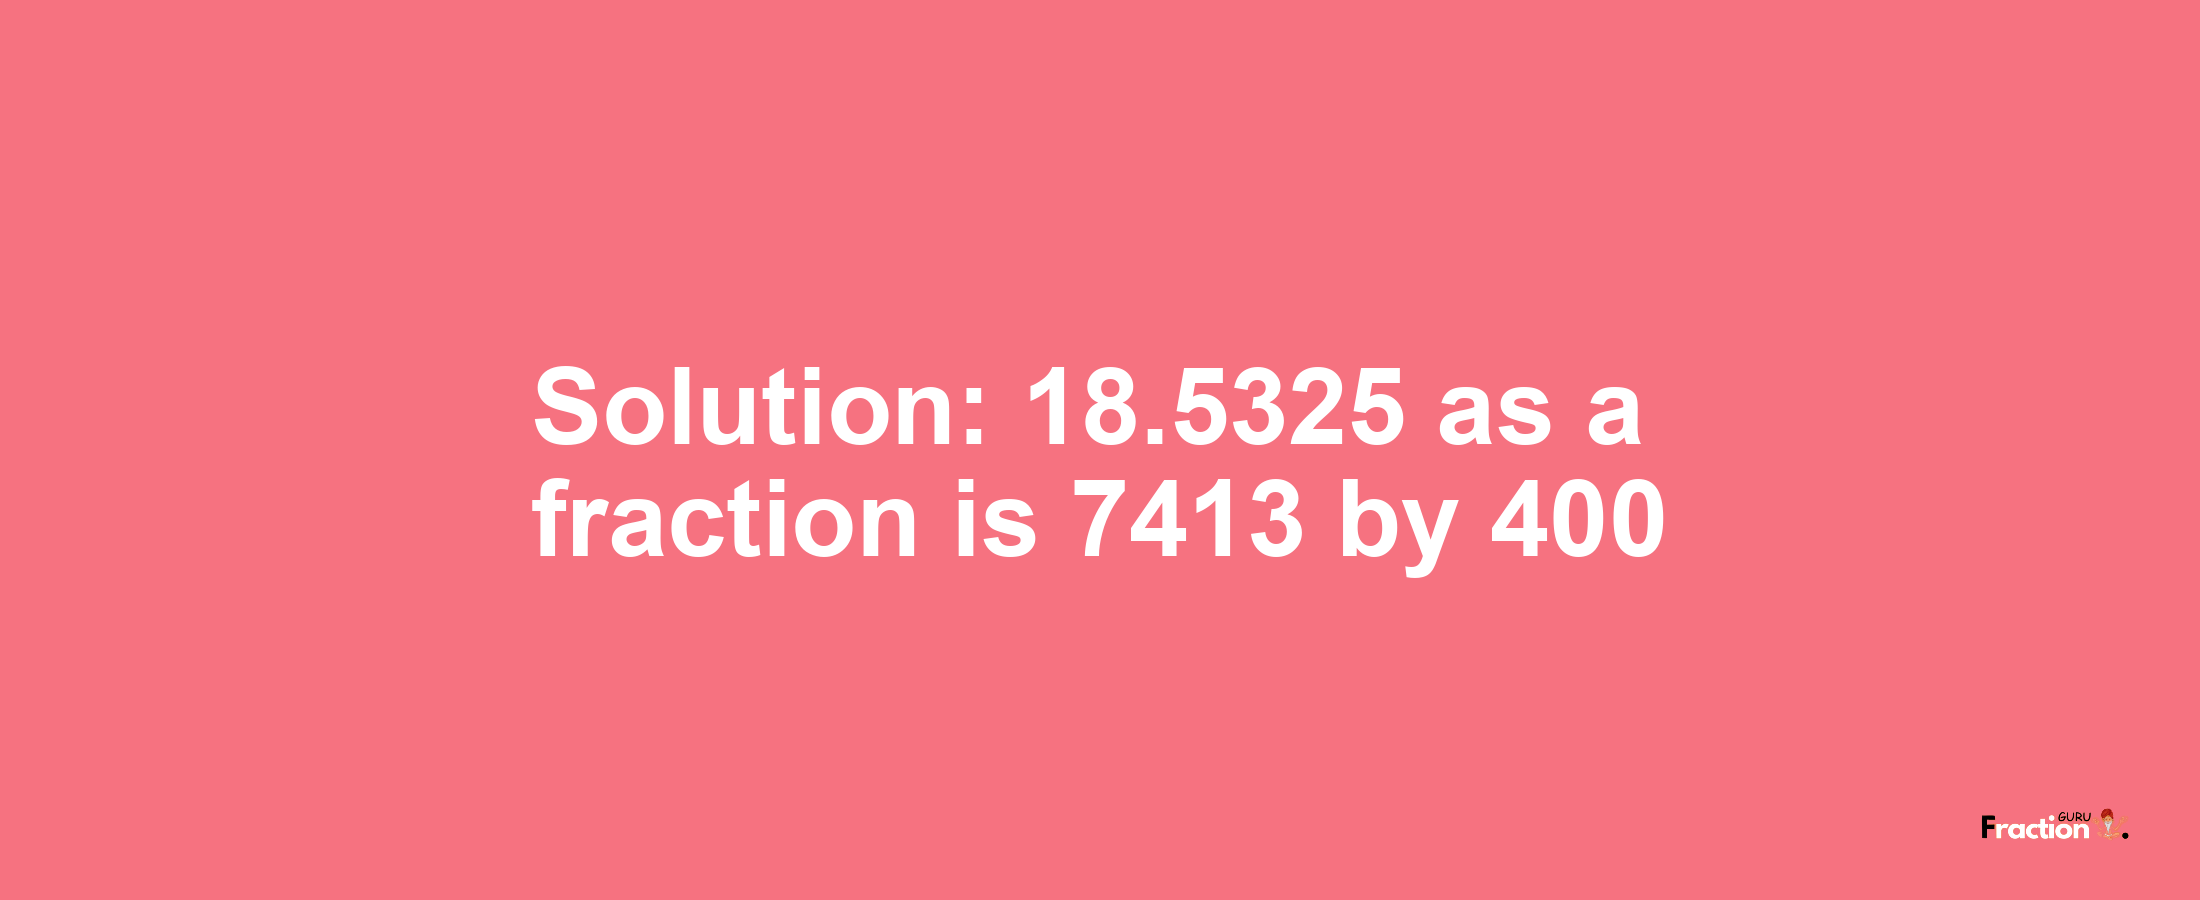 Solution:18.5325 as a fraction is 7413/400